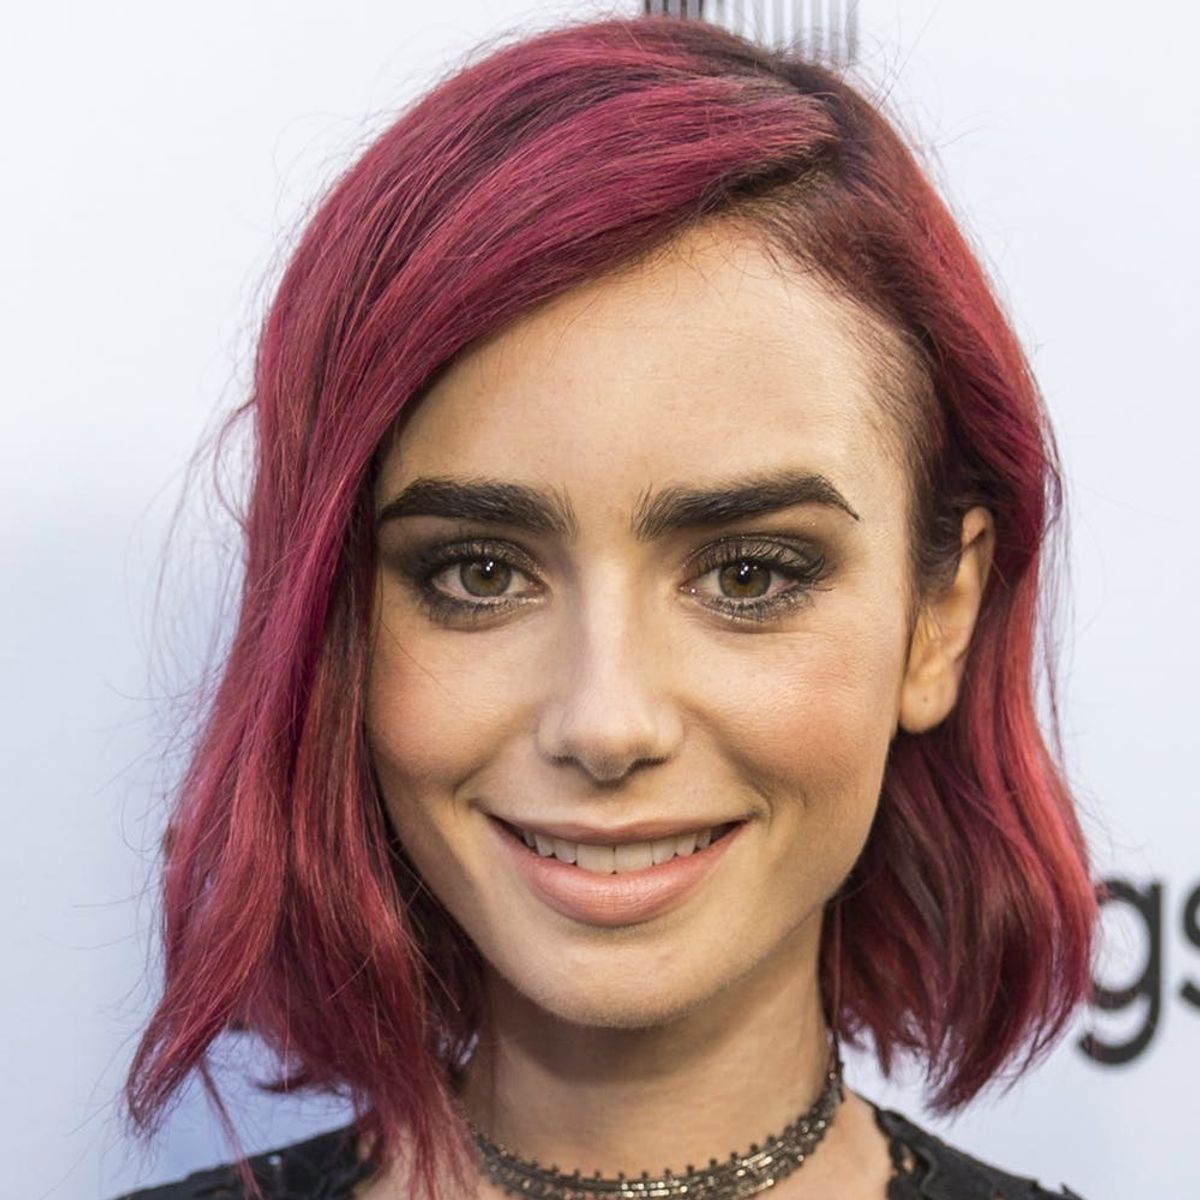 Lily Collins’ Edgy Style Transformation Is Complete With This Rad New Body Art